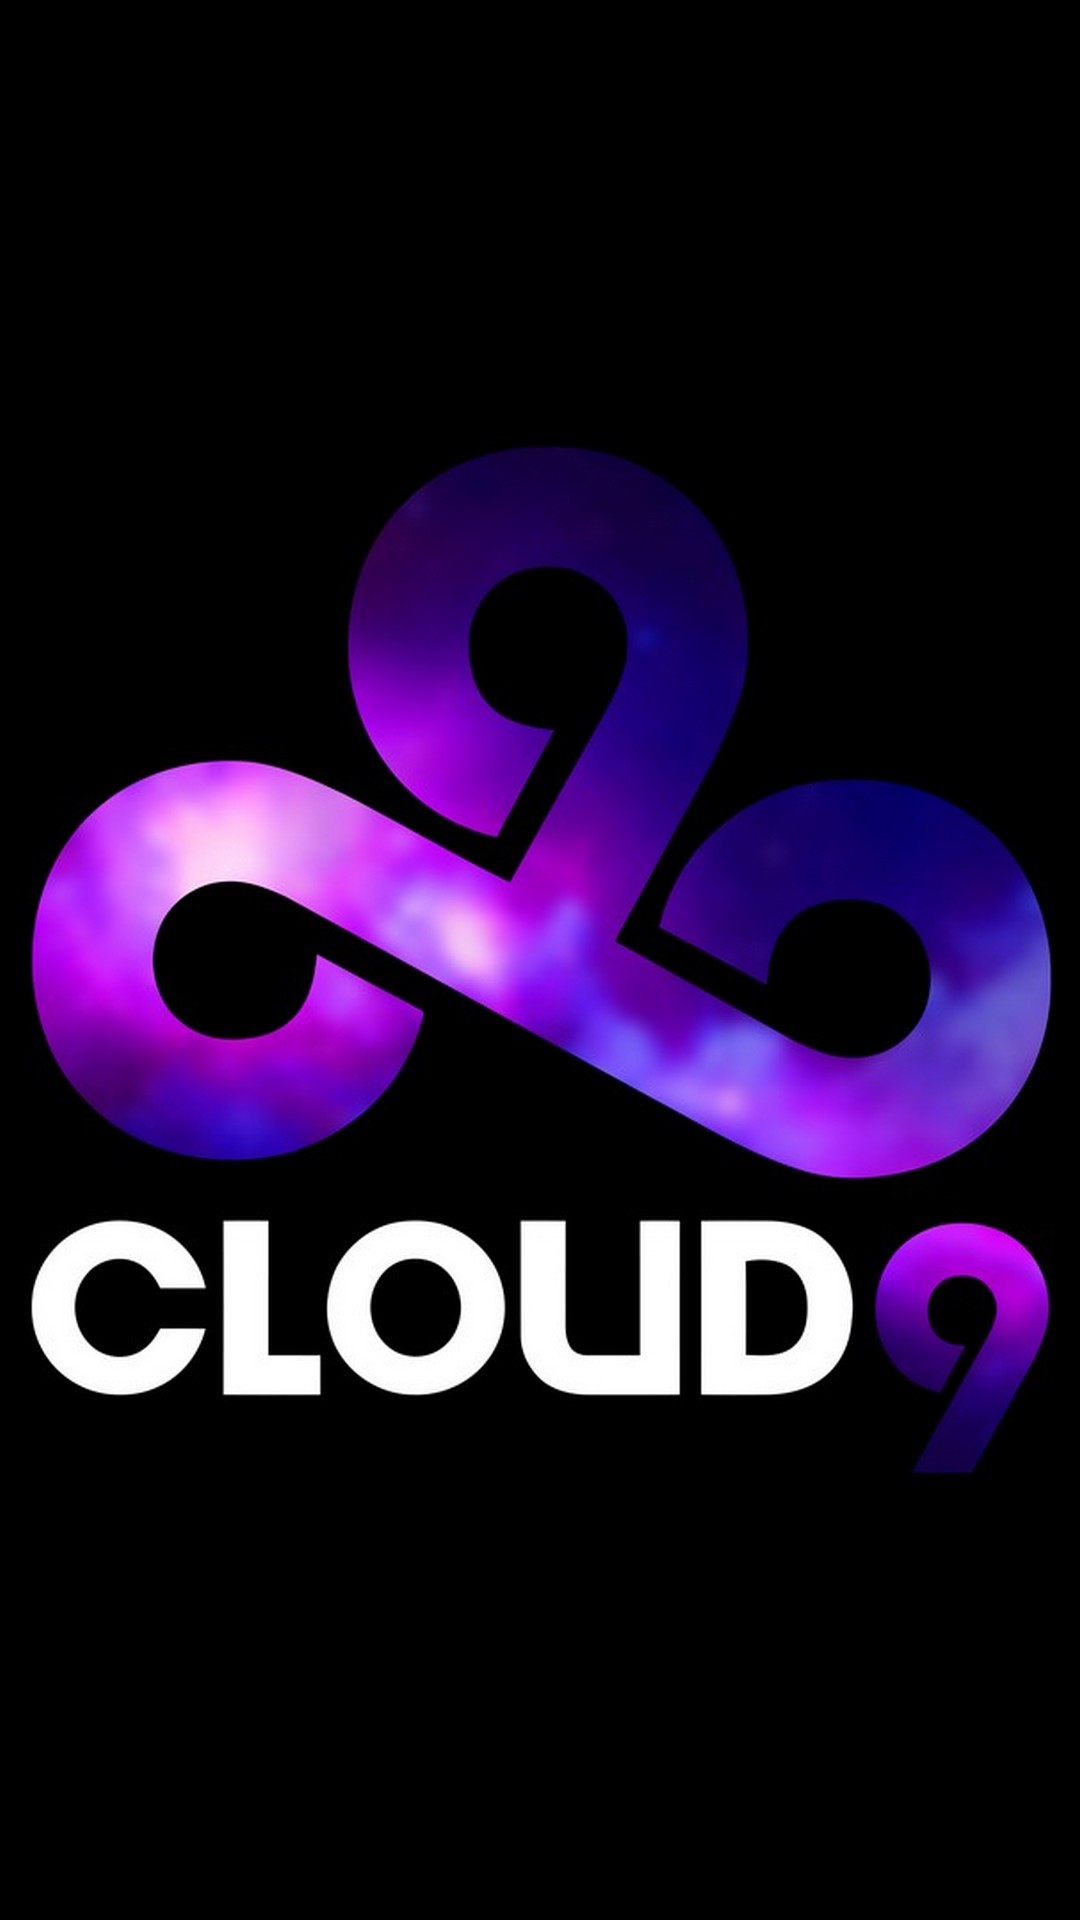 Cloud 9 Wallpaper For Android